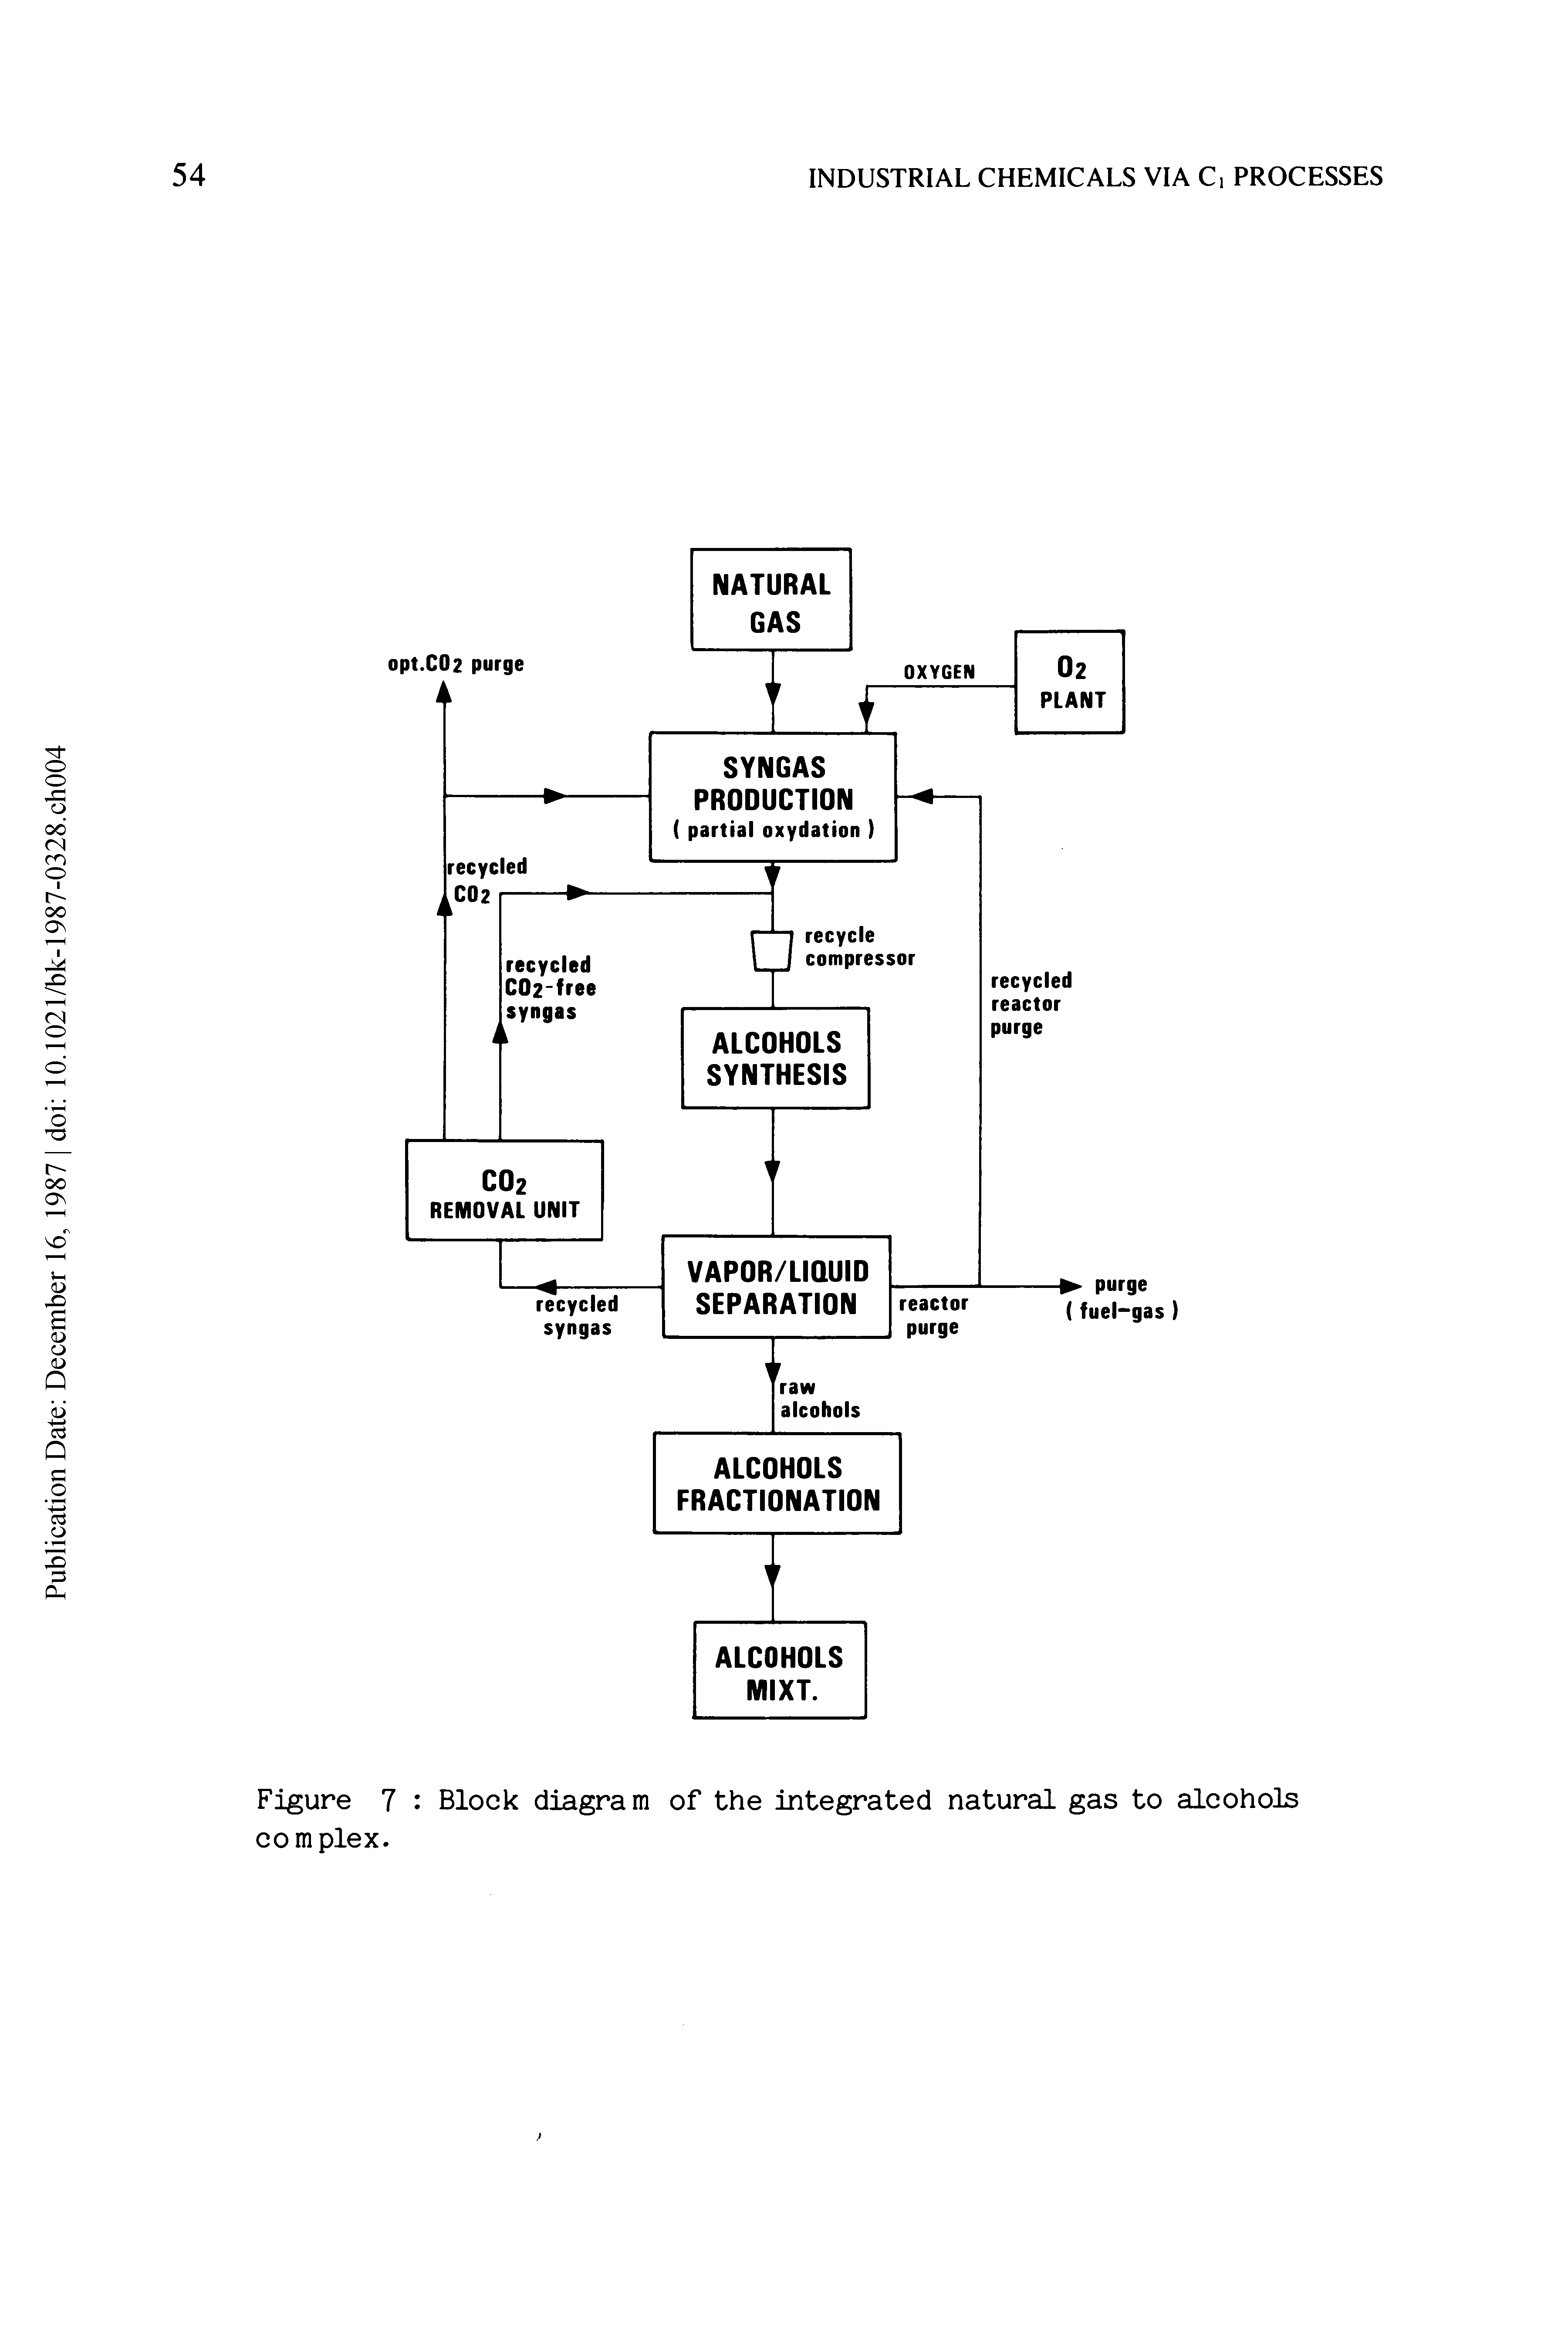 Figure 7 Block diagram of the integrated natural gas to alcohols complex.